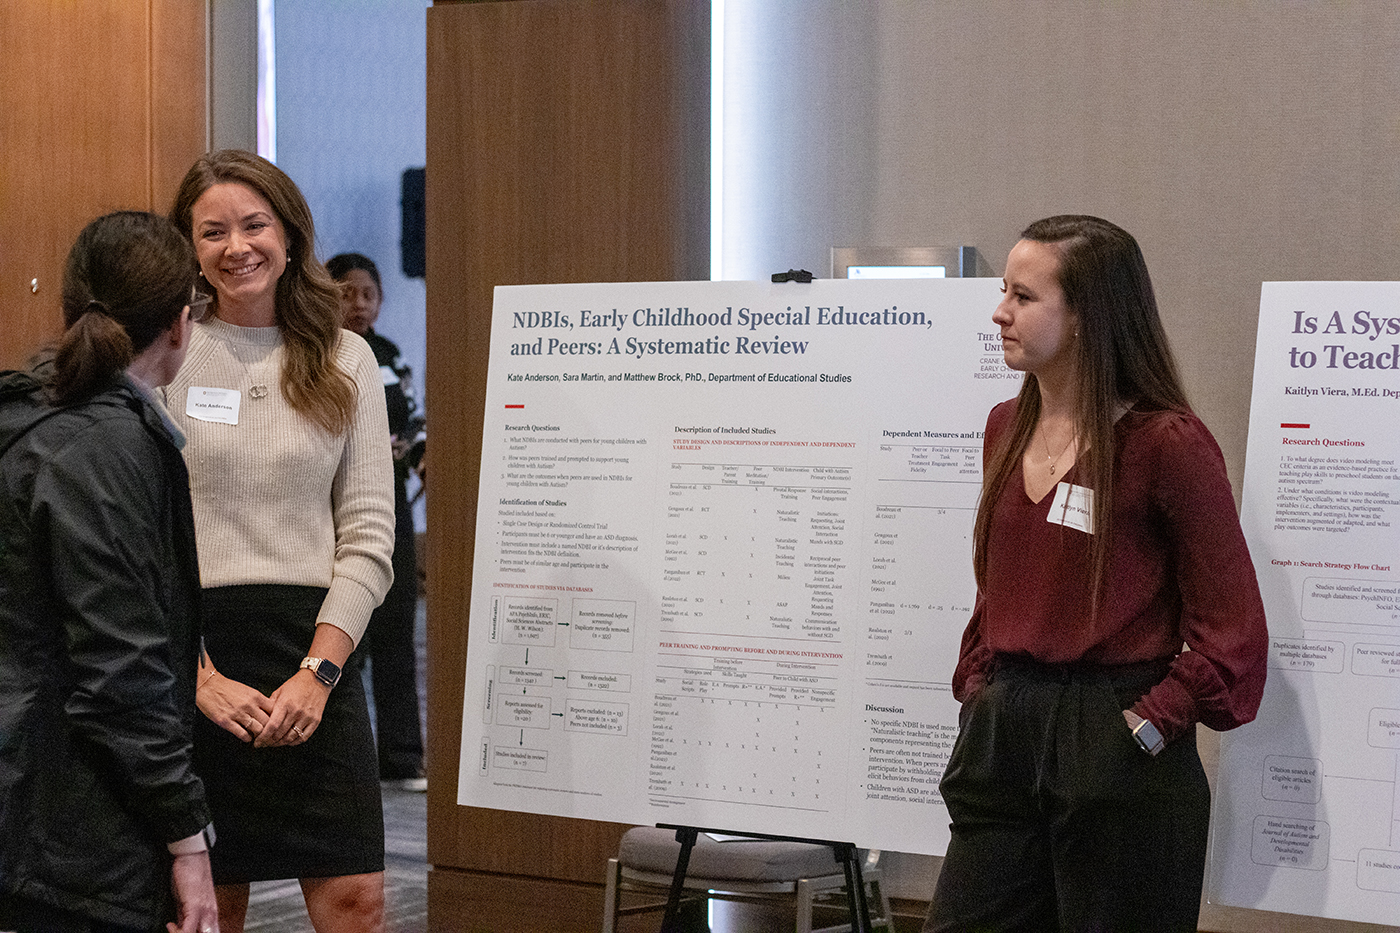 Crane Center graduate research associates Kate Anderson, left, and Kaitlyn Viera, stand next to posters discussing their research during the 2023 Crane Symposium on Children. Anderson is smiling while listening to a symposium attendee immediately in front of her, while Viera looks on.